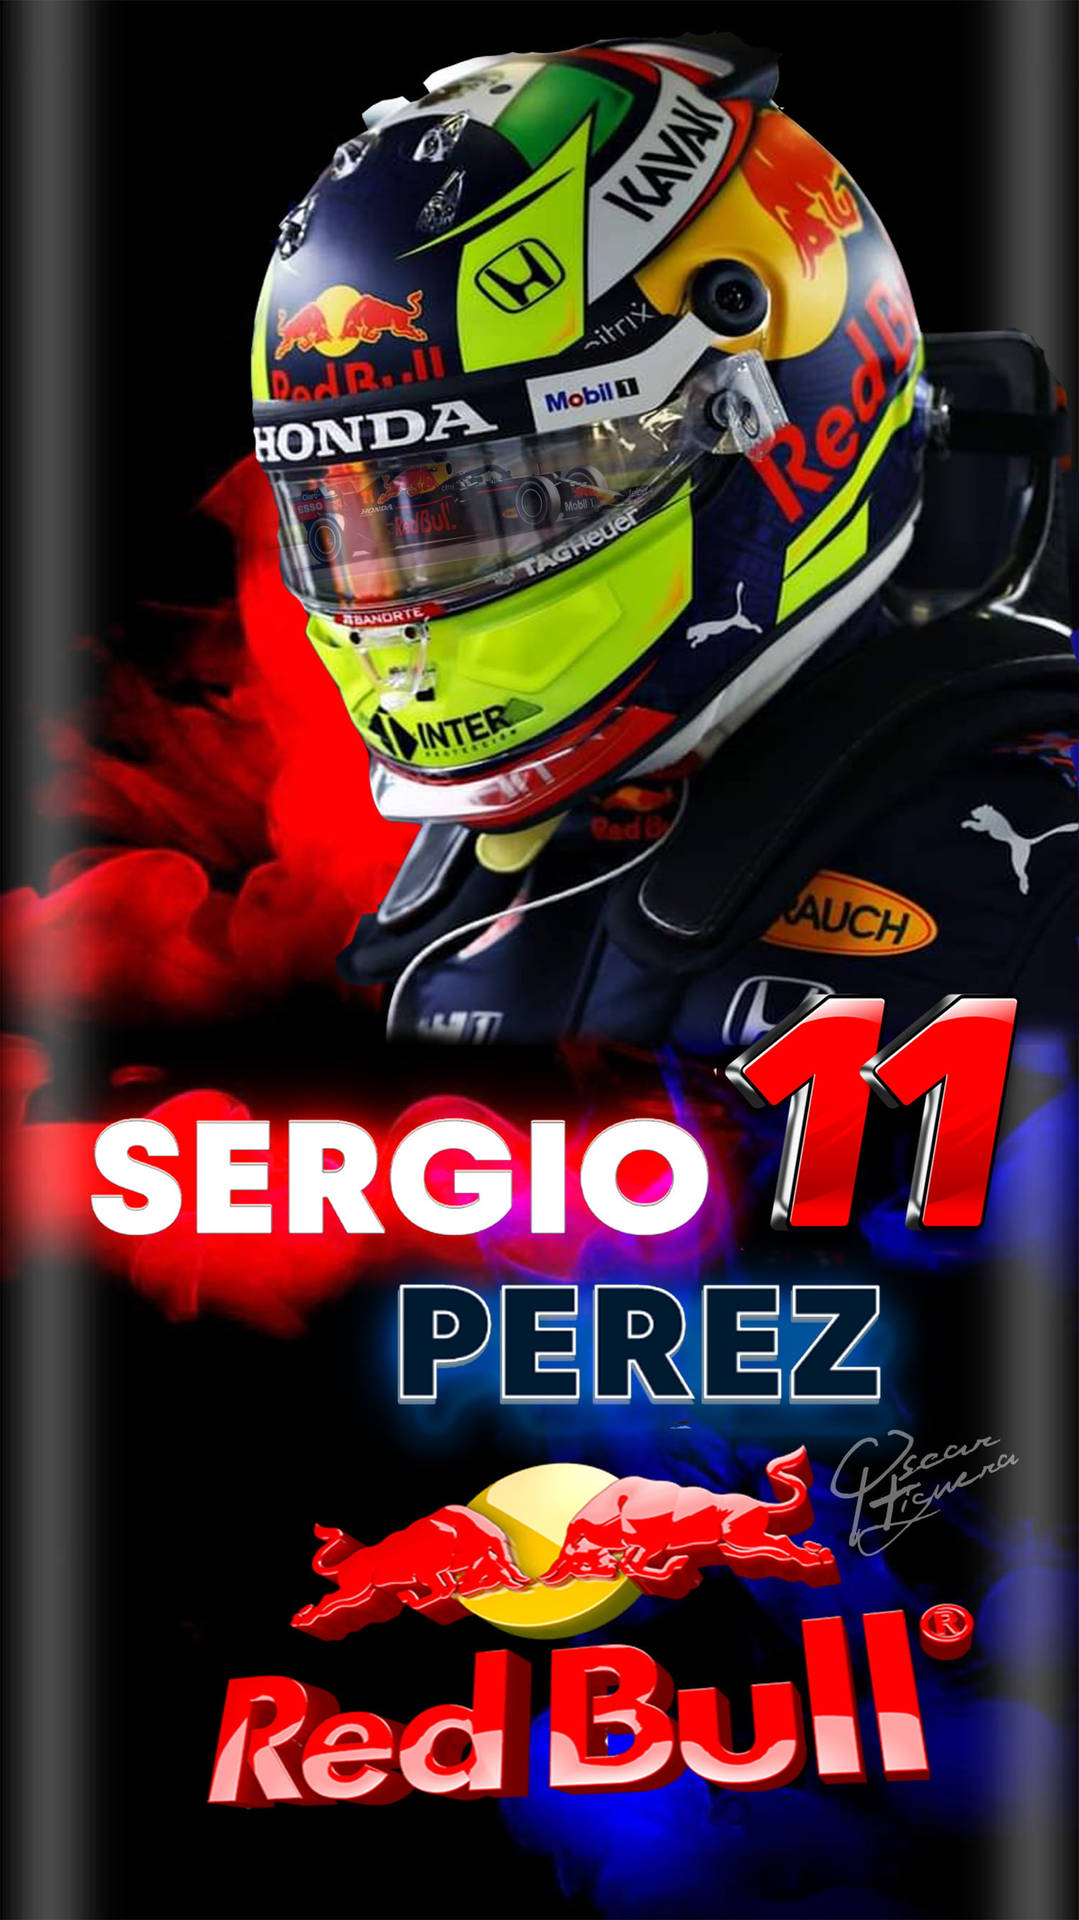 "Sergio Perez Racing in His Official Number 11 Car" Wallpaper